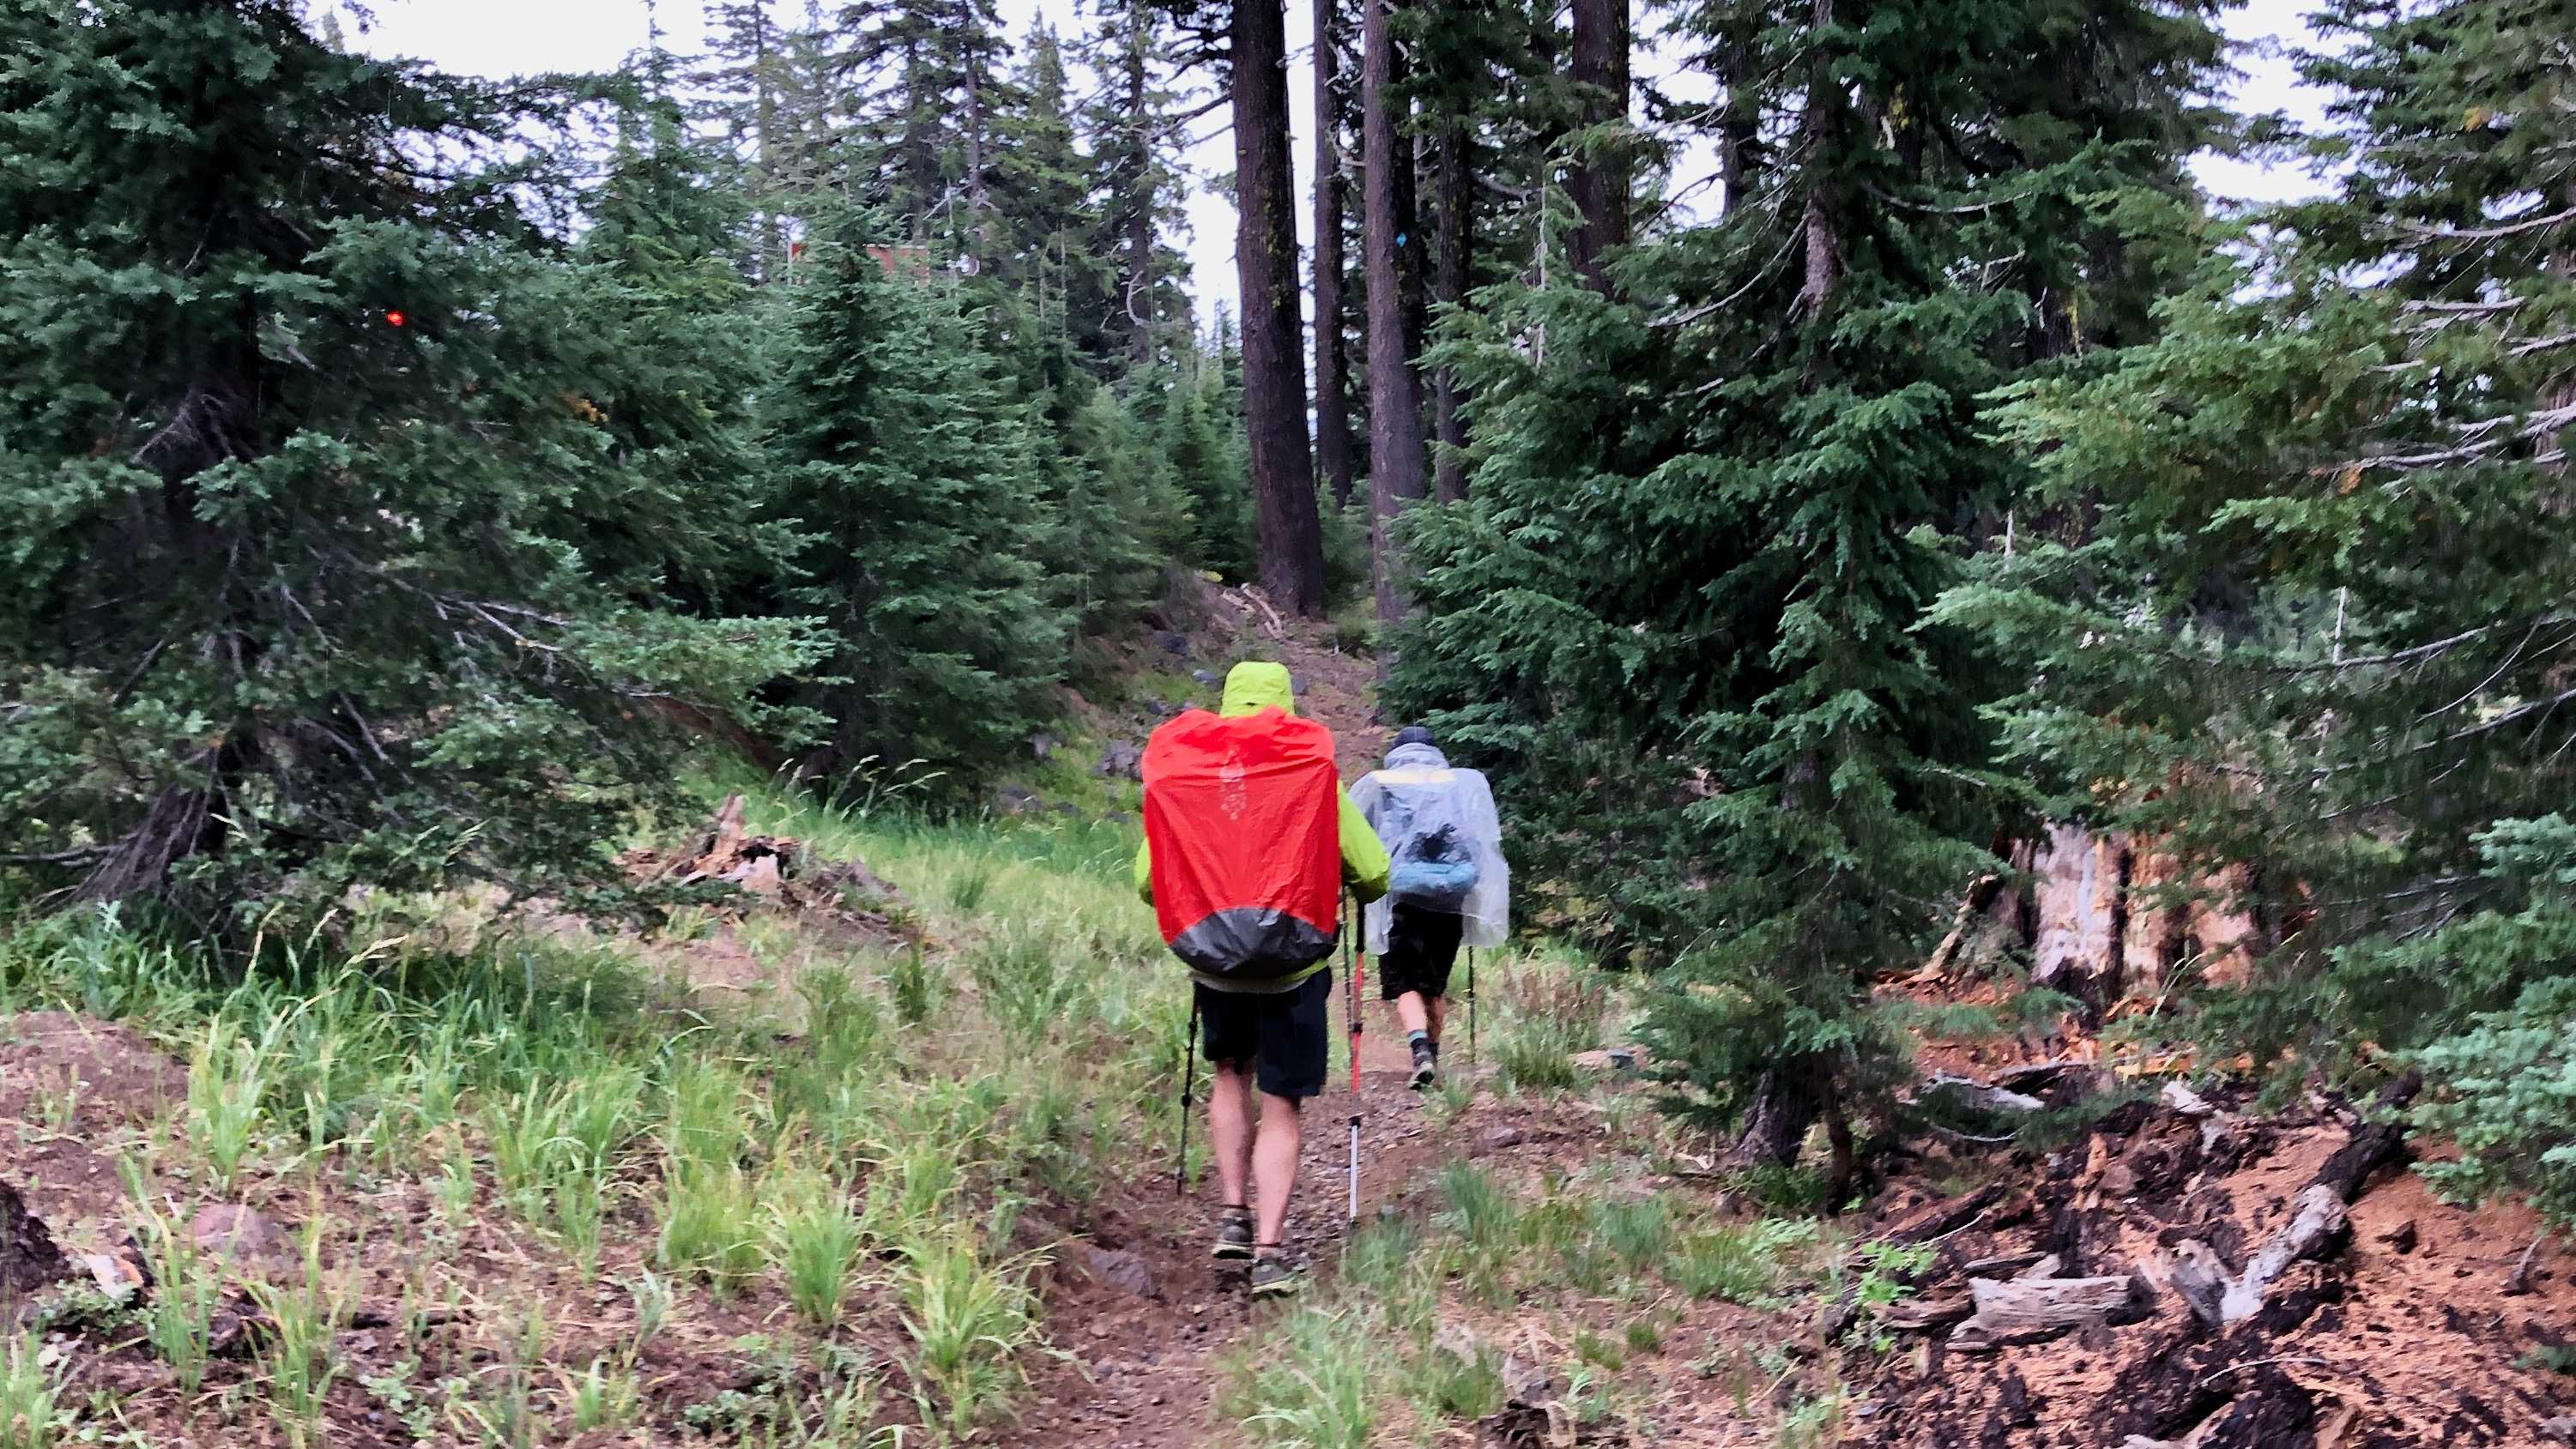 PCT 2019: Day 107, Grouse Hill Camp to Mazama Village | Hike with Gravity